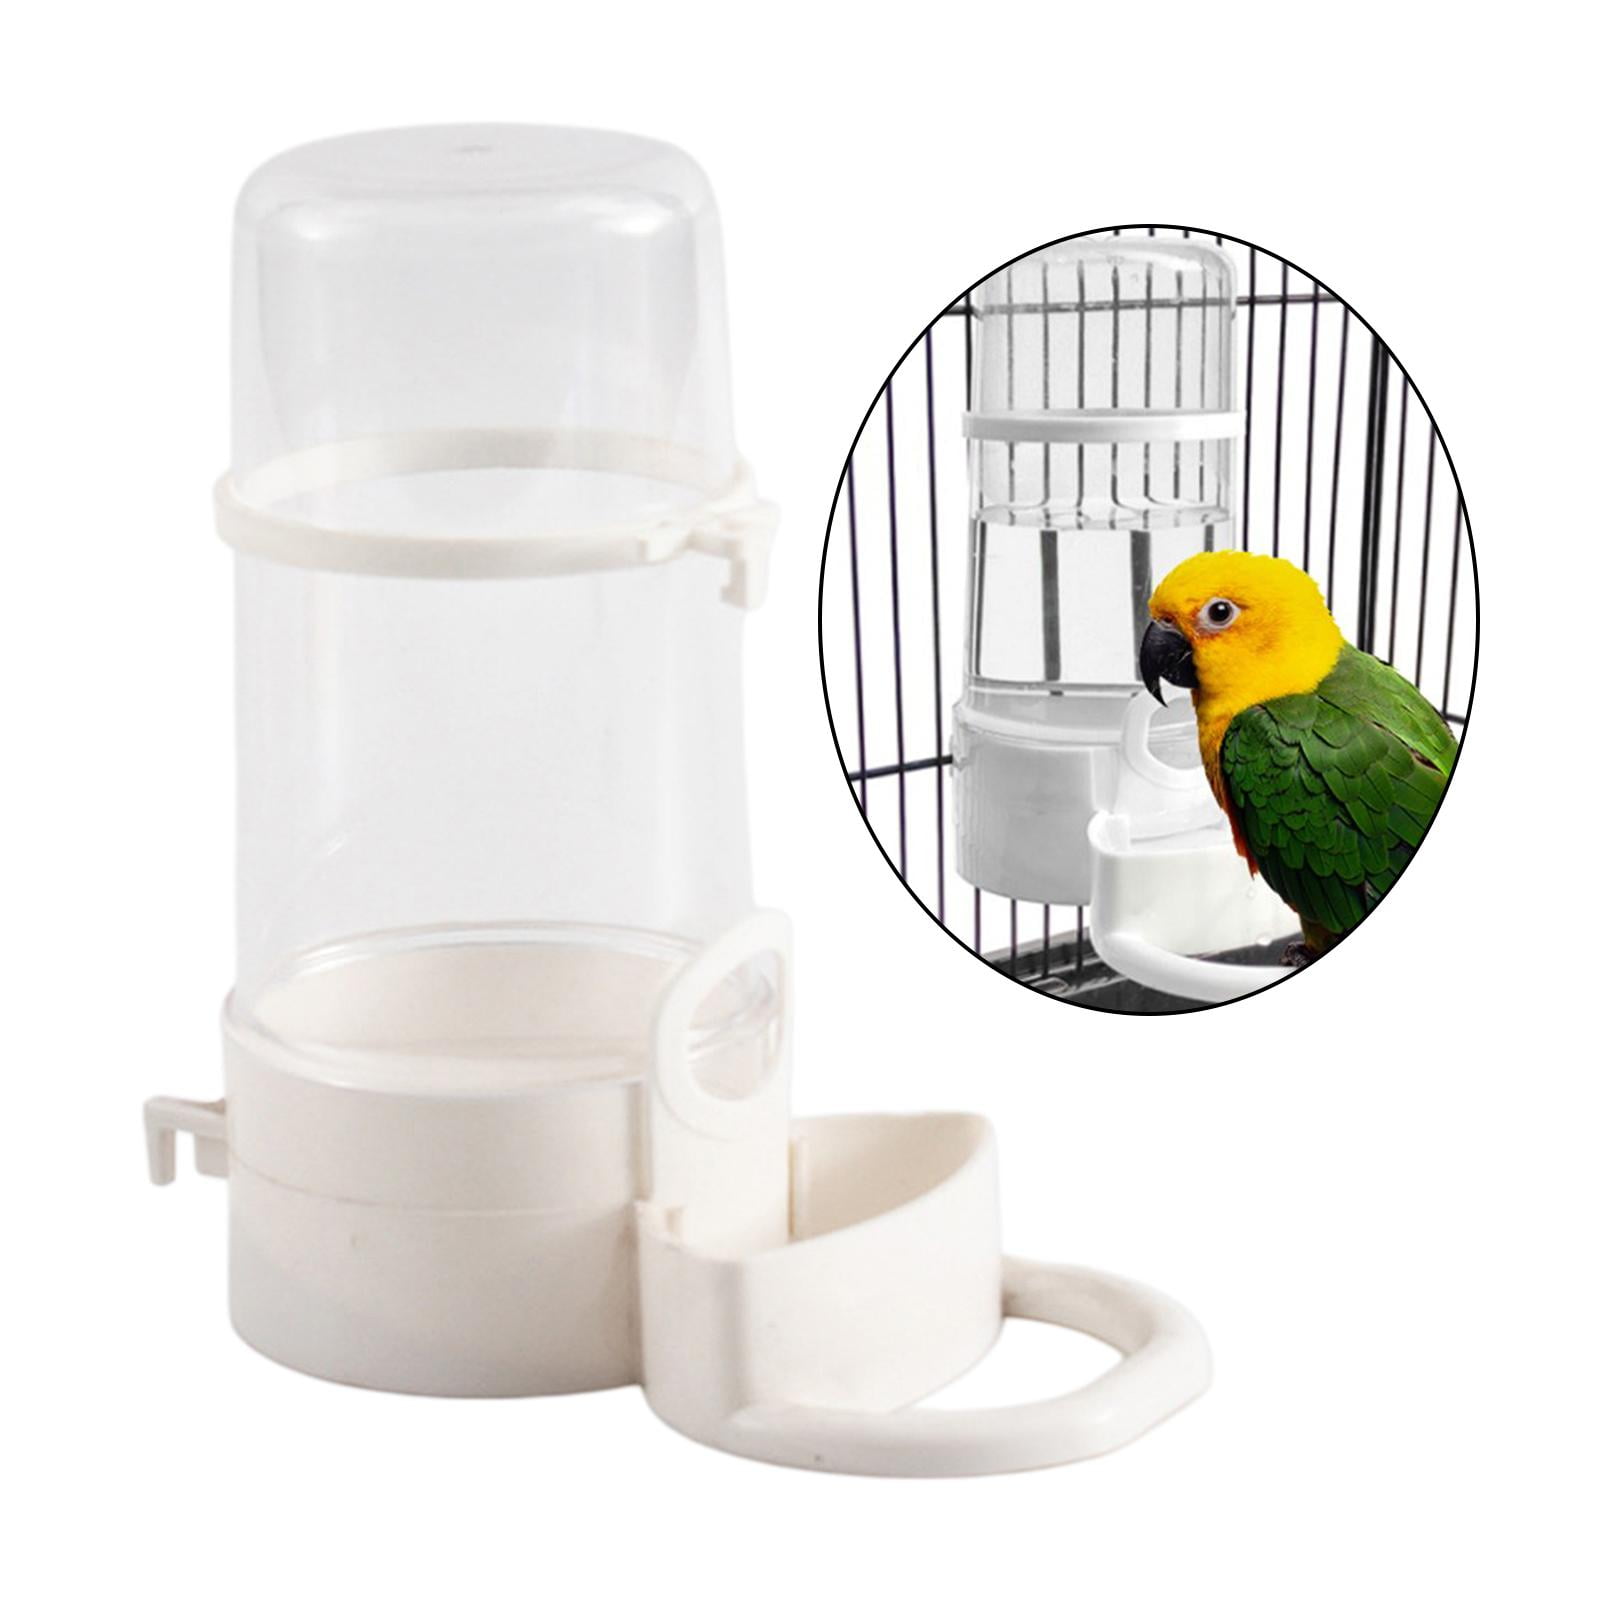 BLSMU Parakeet Water Dispenser,No-Mess Parrot Feeder,Macaw Waterer,Cockatiel Cage Accessories,Automatic Feeding for African Greys,Budgies,Finch and Other Bird 2Pcs 